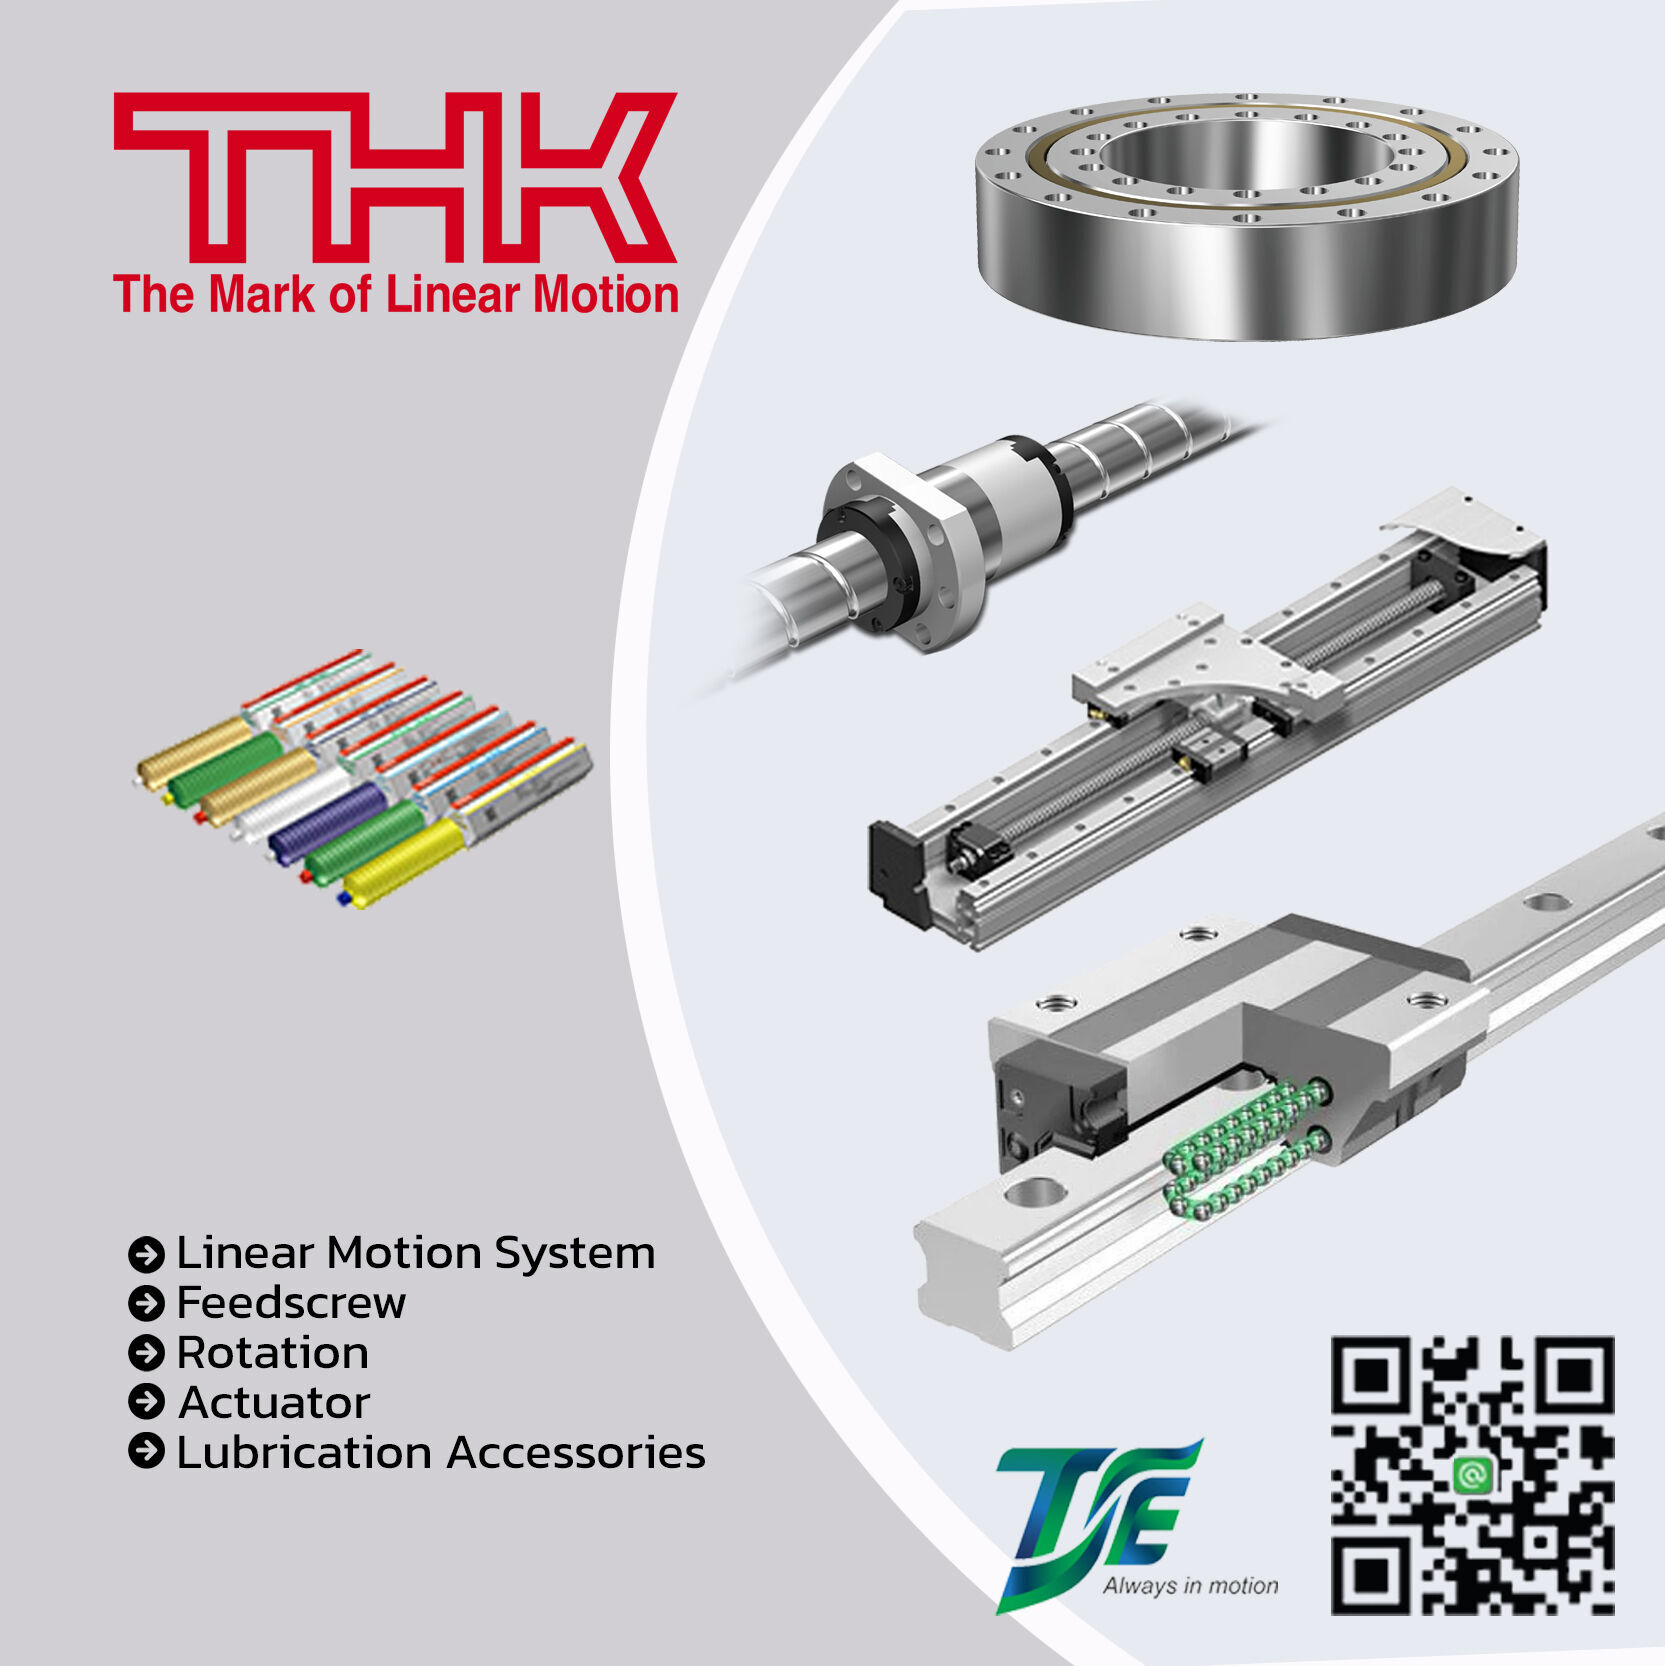 thk linear motion systemfeed screw rotation actuator lubrication accessories